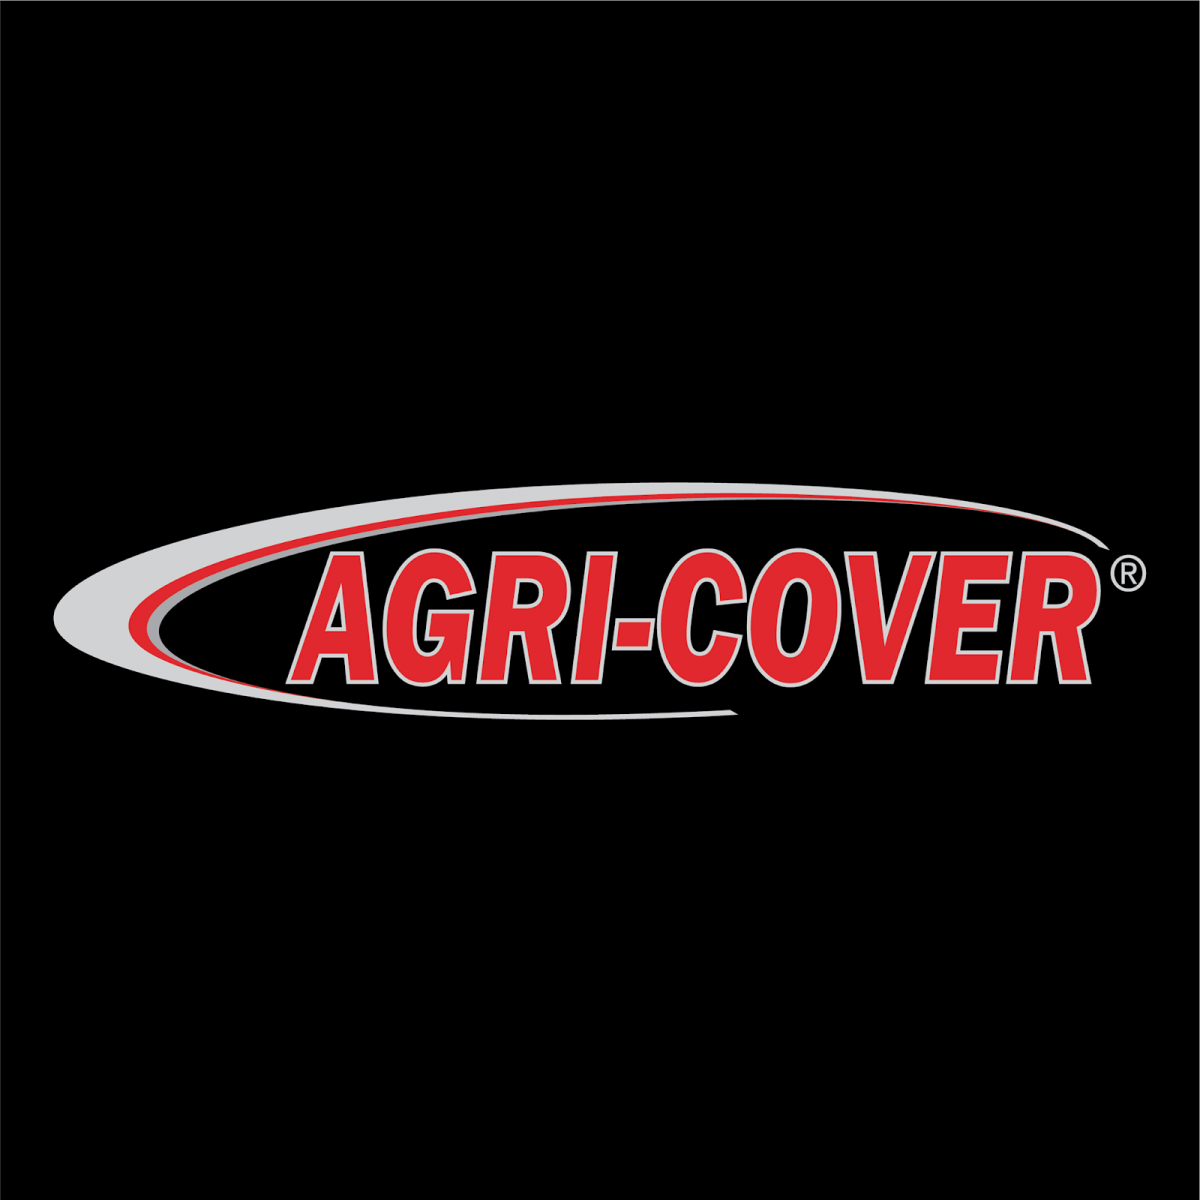 Agri-Cover Receives Growing Jamestown Award: Here’s Why Main Photo